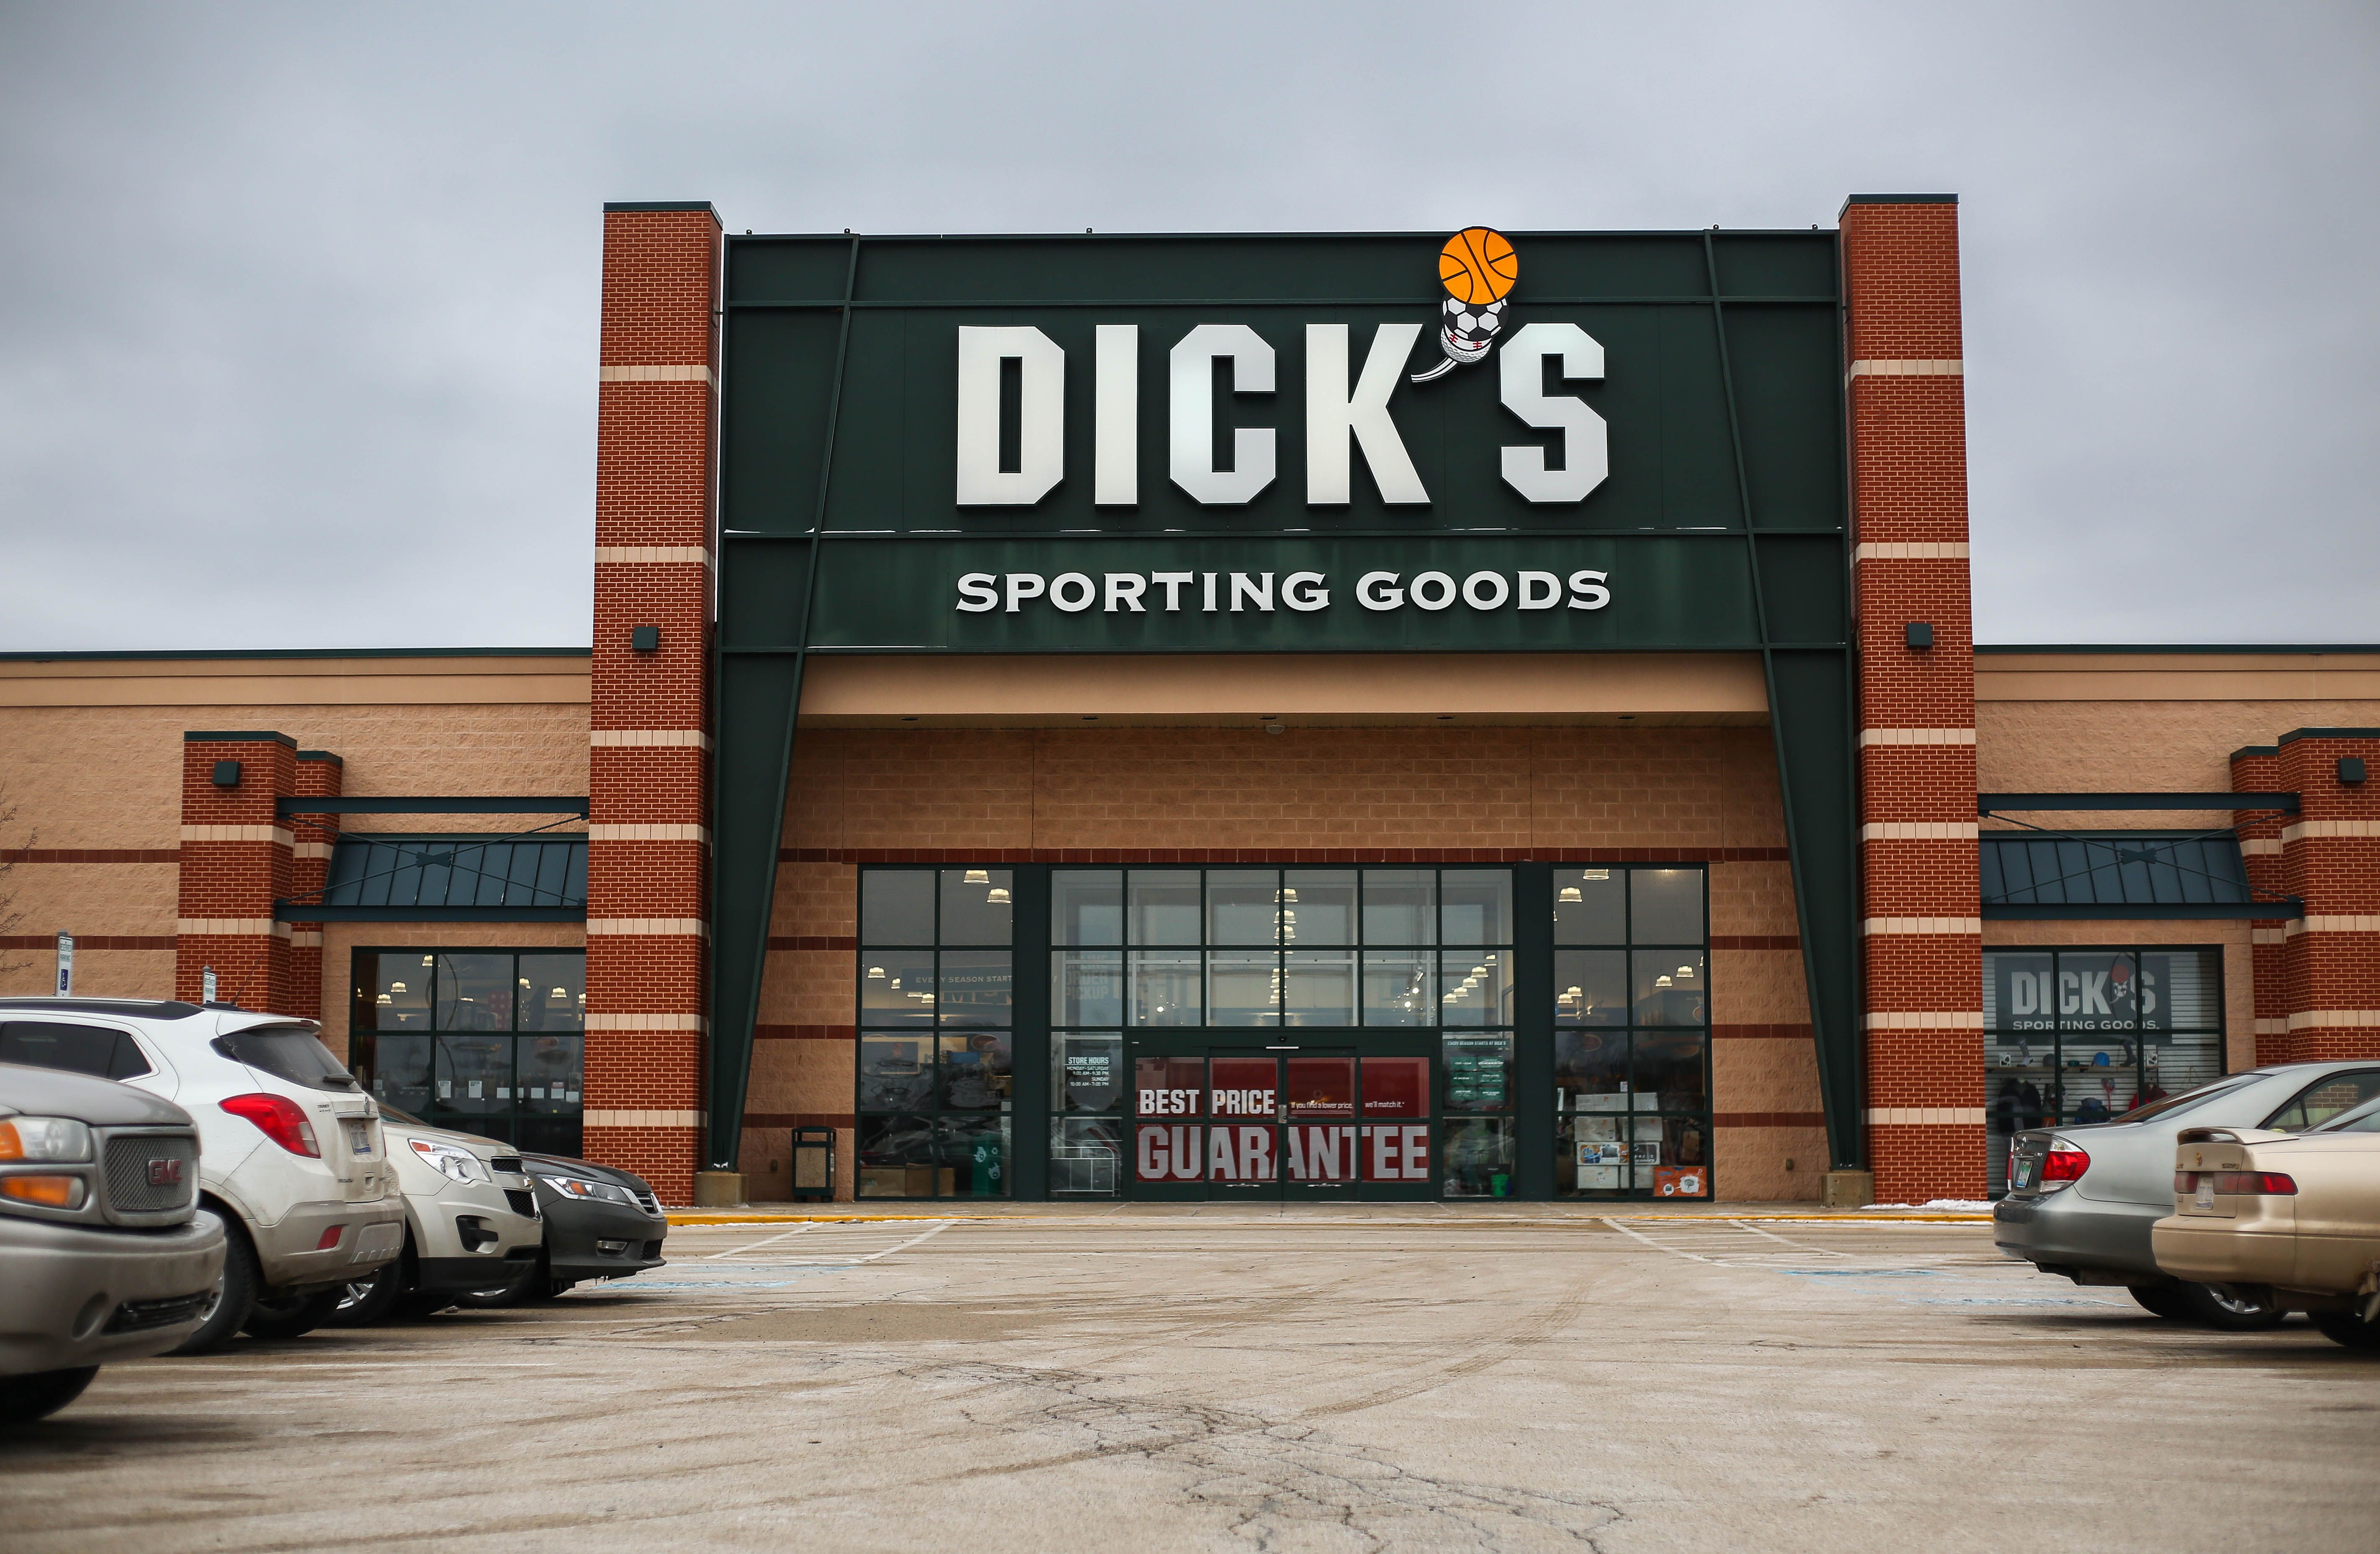 Dick's Sporting Goods to launch new outdoors store brand 'Public